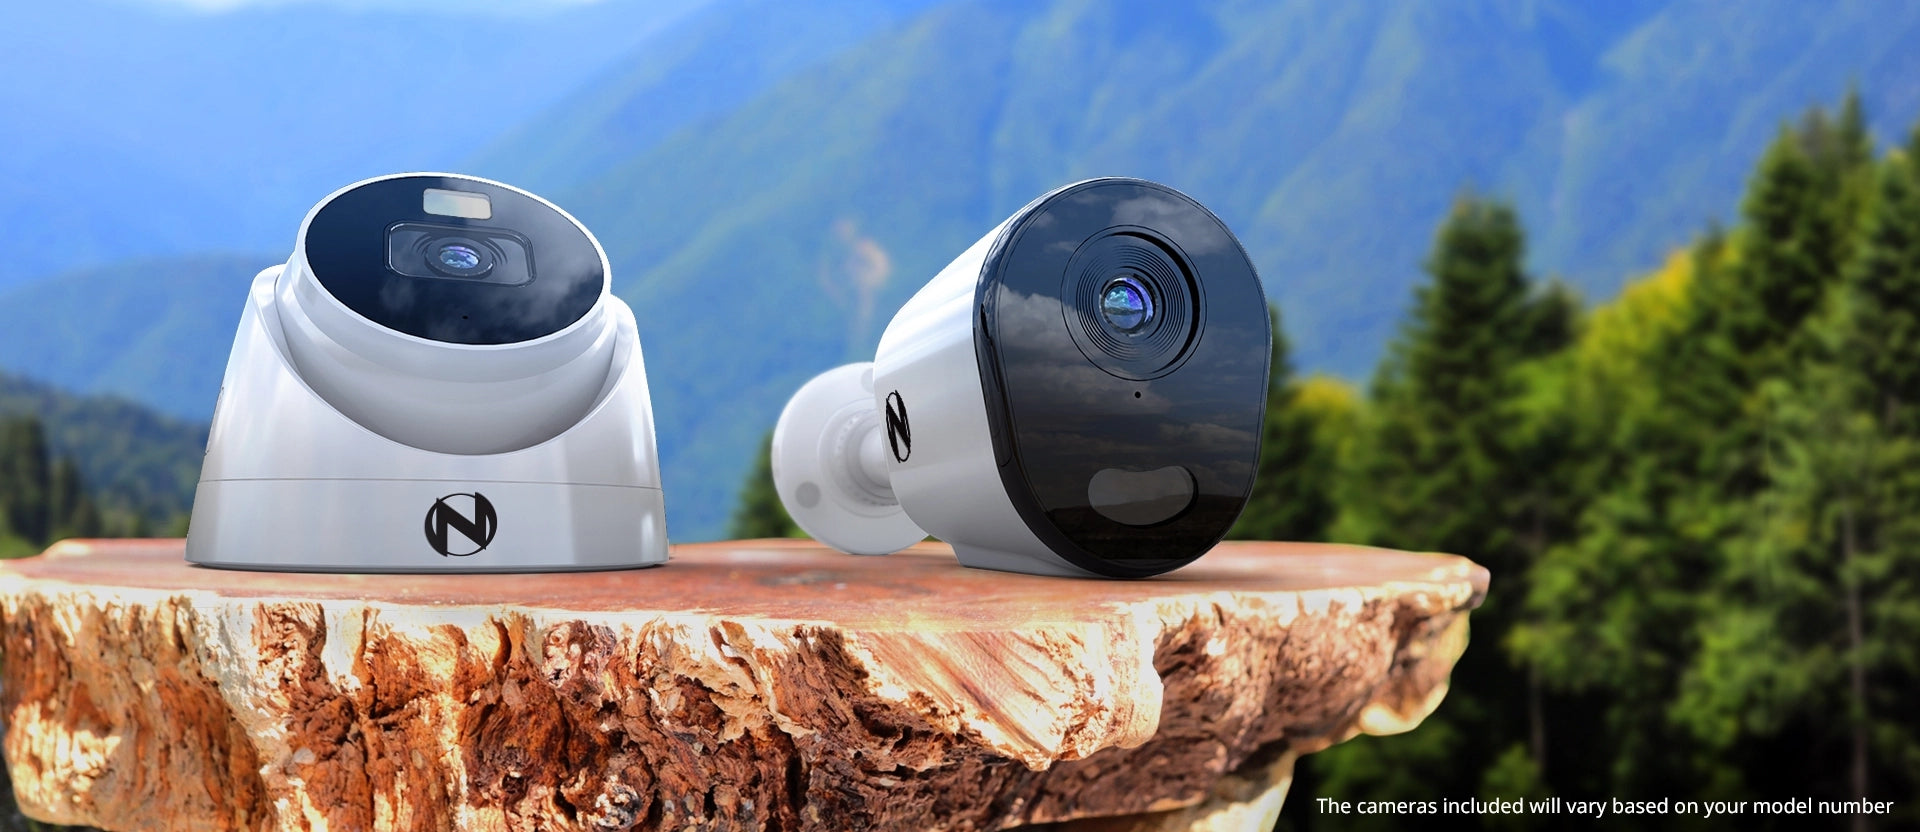 two security cameras on table with forest background